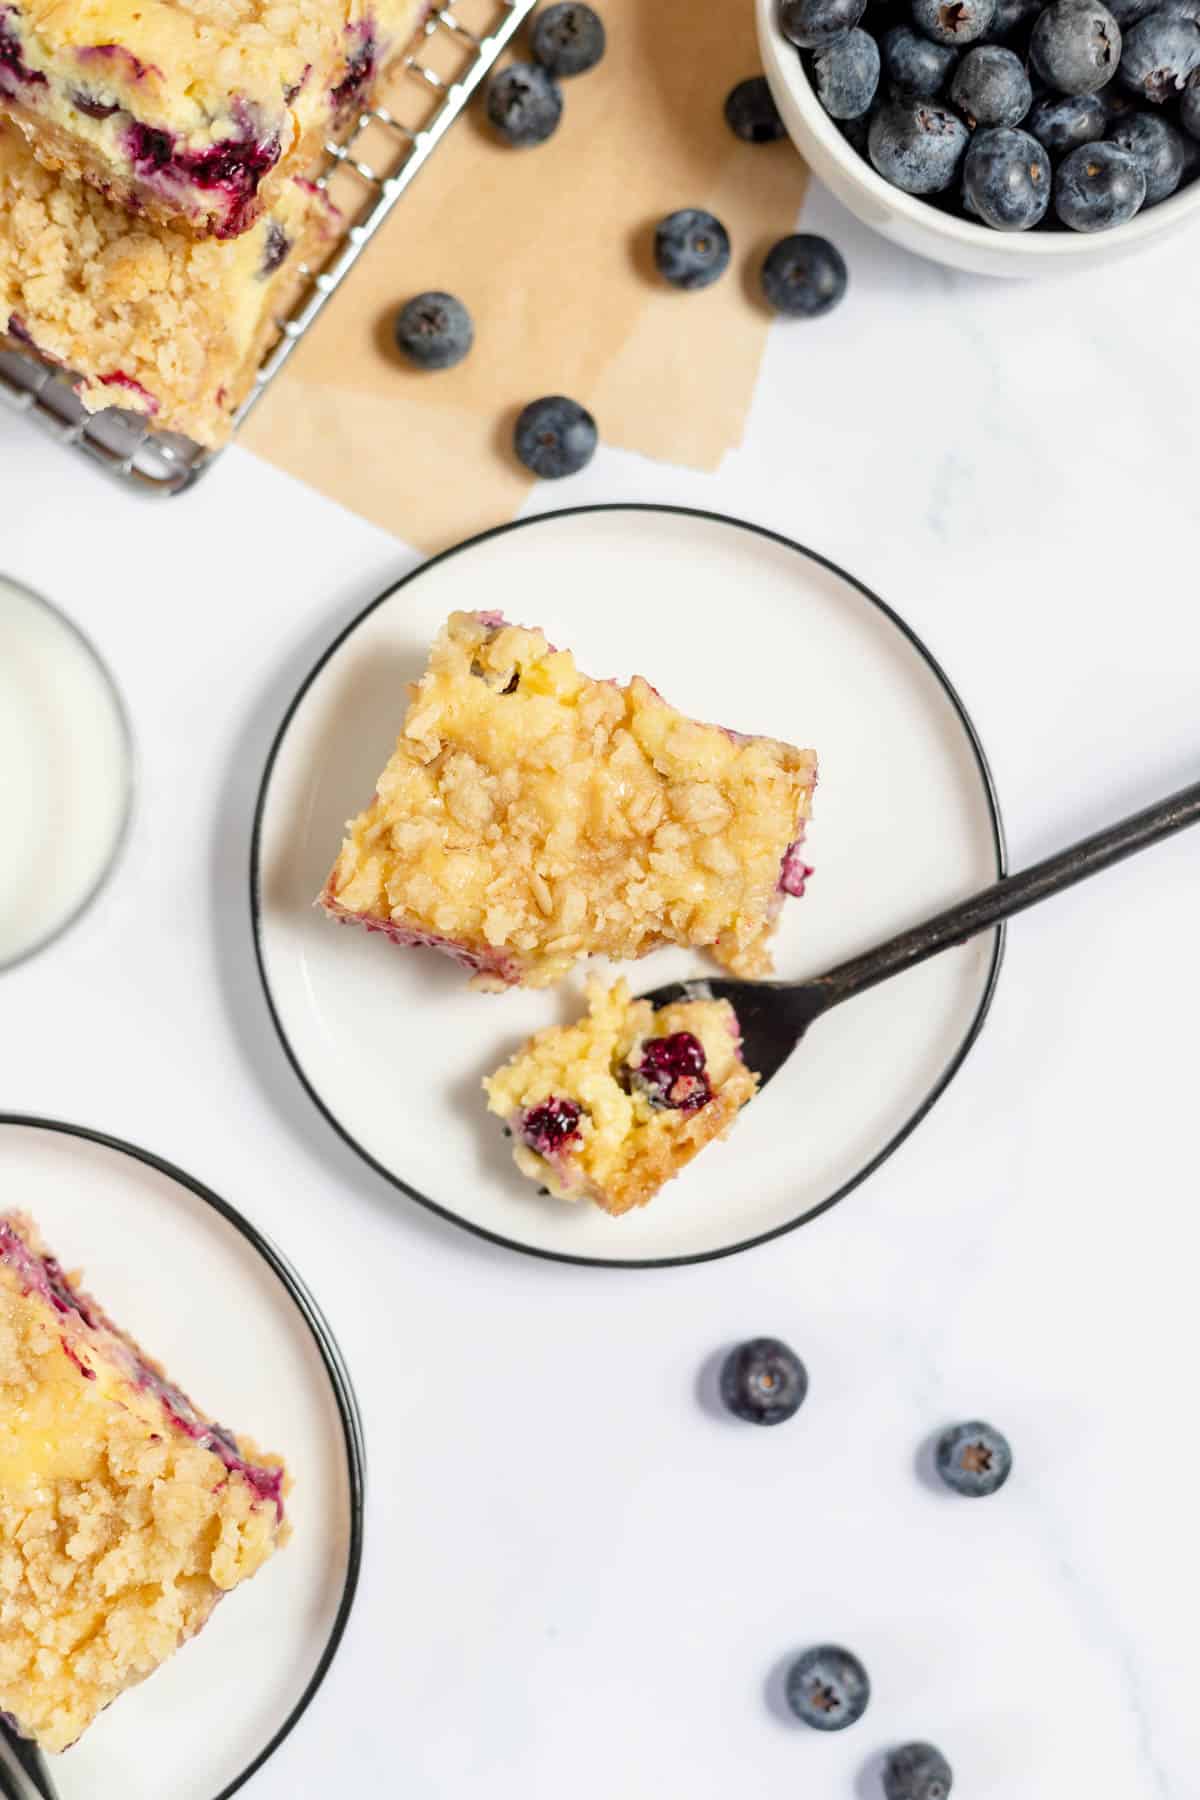 A blueberry cheesecake bar on a white plate with a fork holding a bite of the dessert.